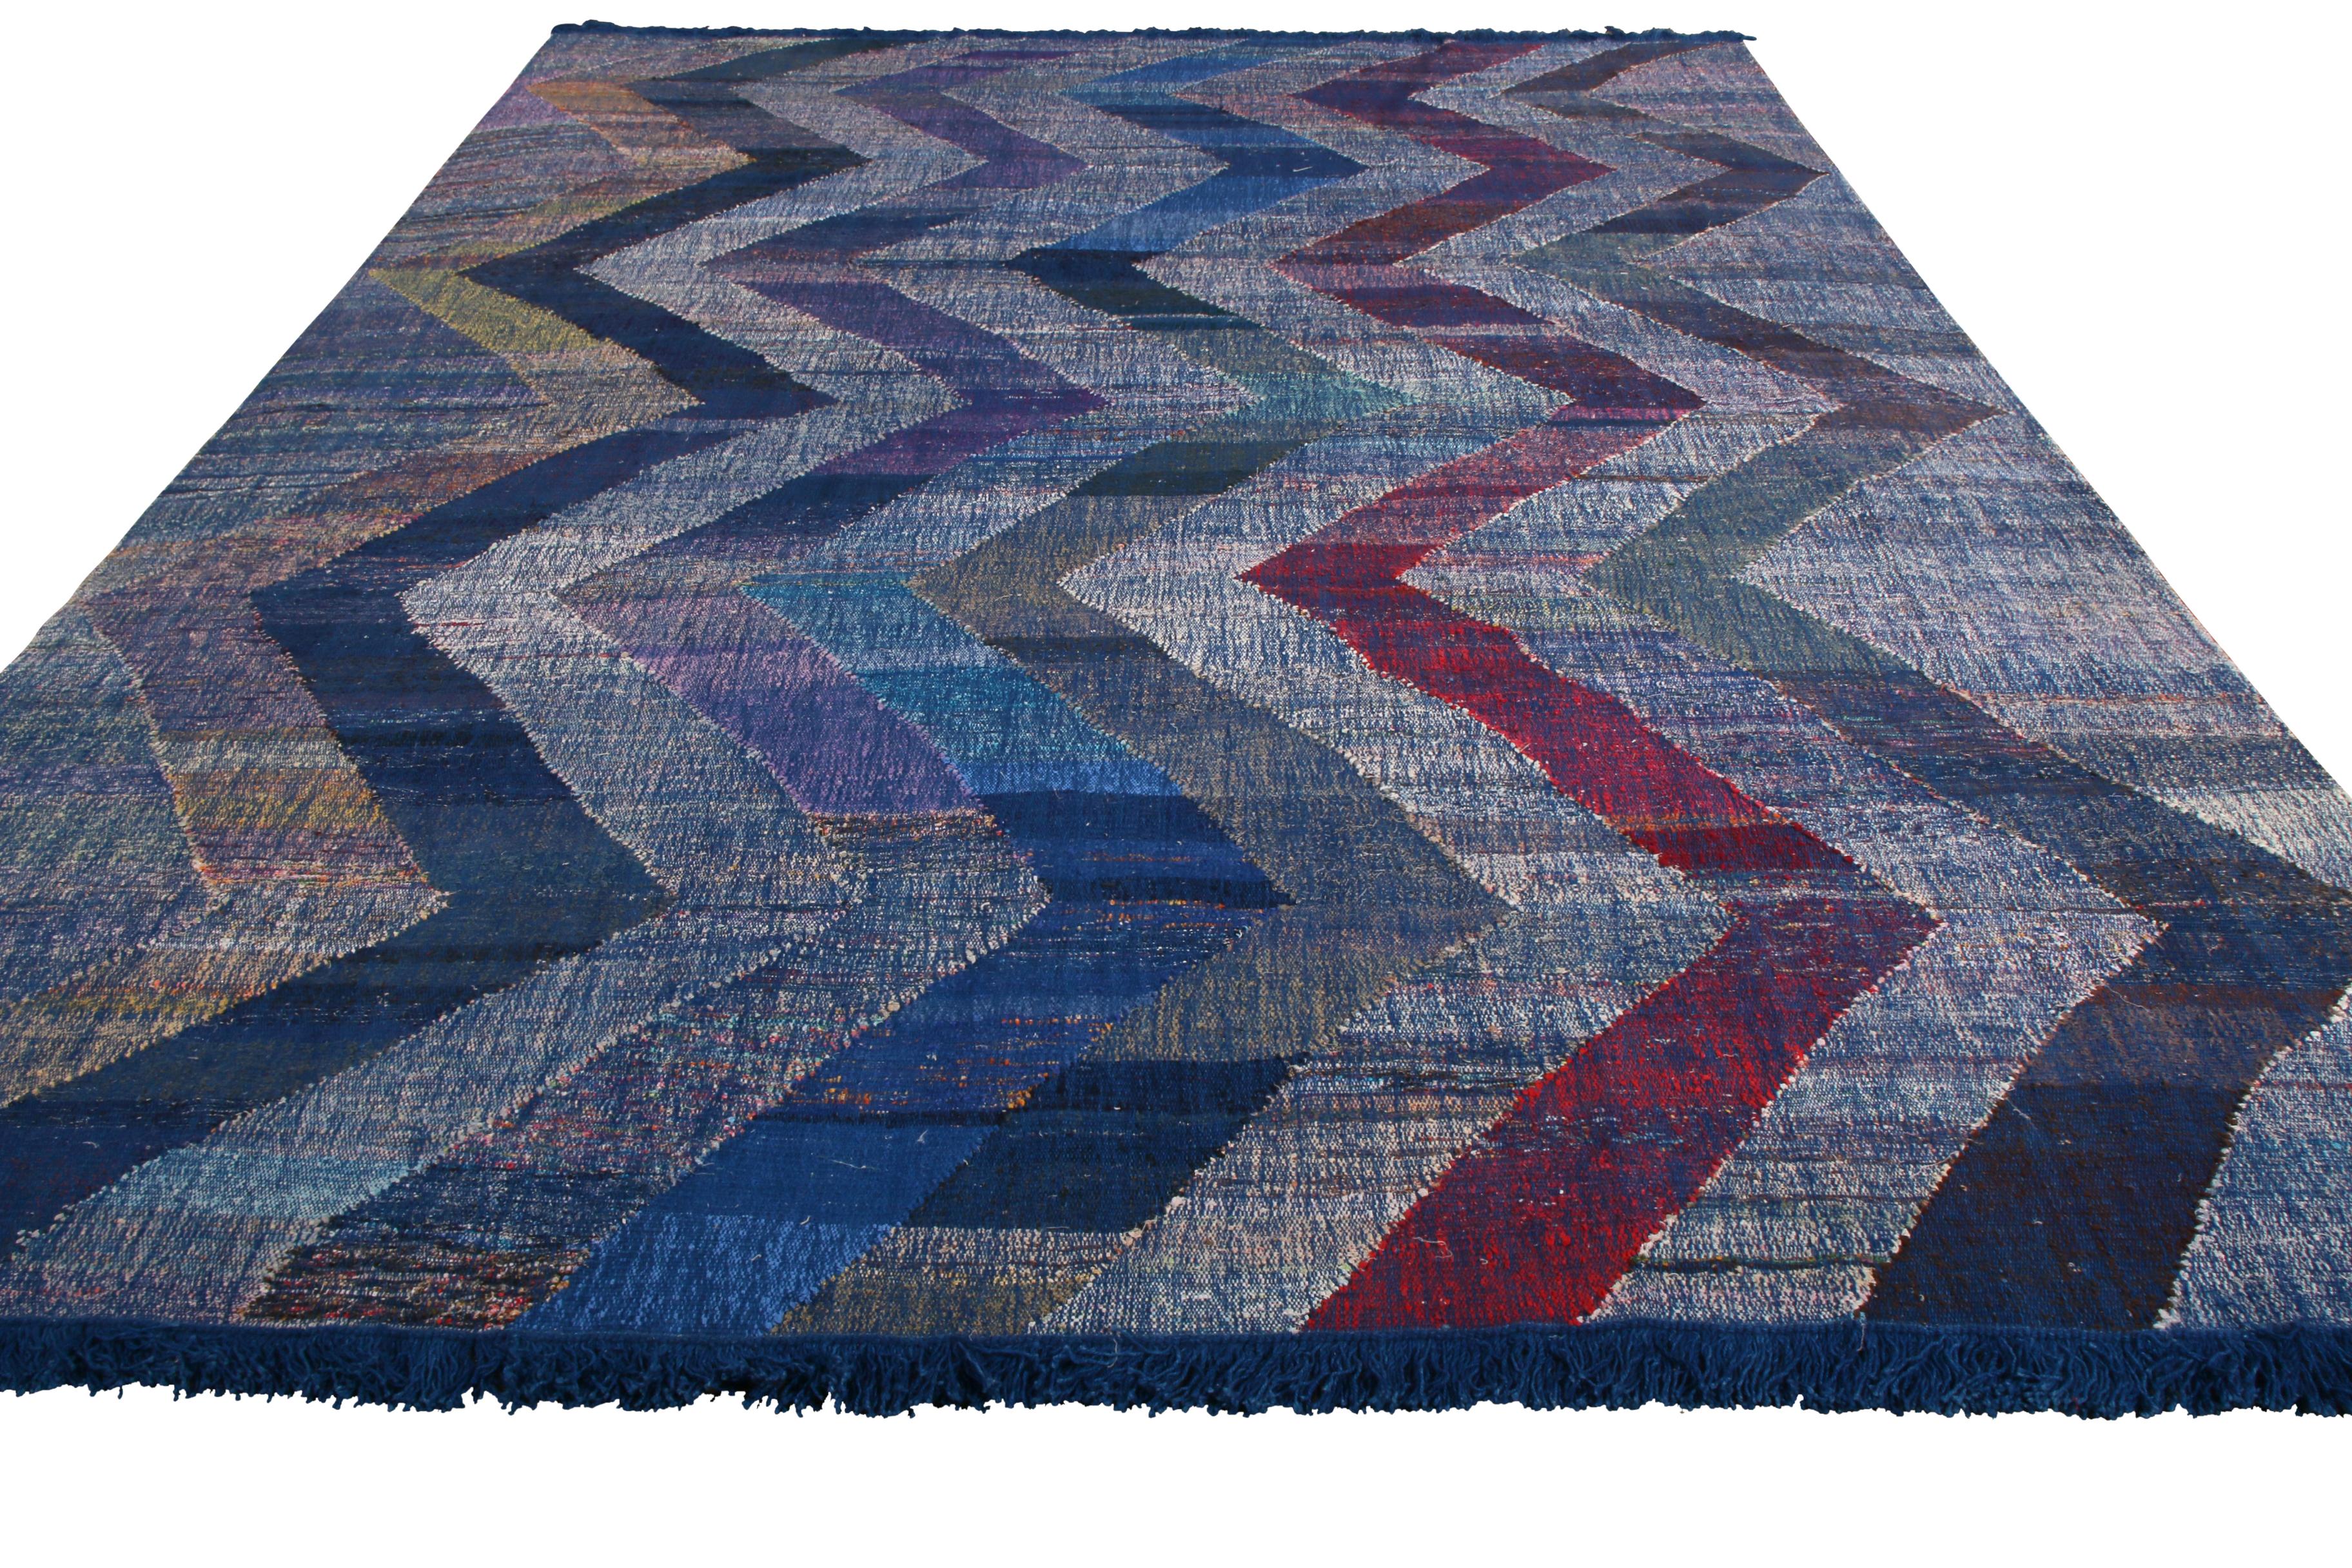 This modern Kilim represents a selection of distinct new patterns joining Rug & Kilim’s New and Modern collection, uniquely handwoven from the yarns of Classic textiles and Kilims lending to the eccentric variations in color and bold pattern each